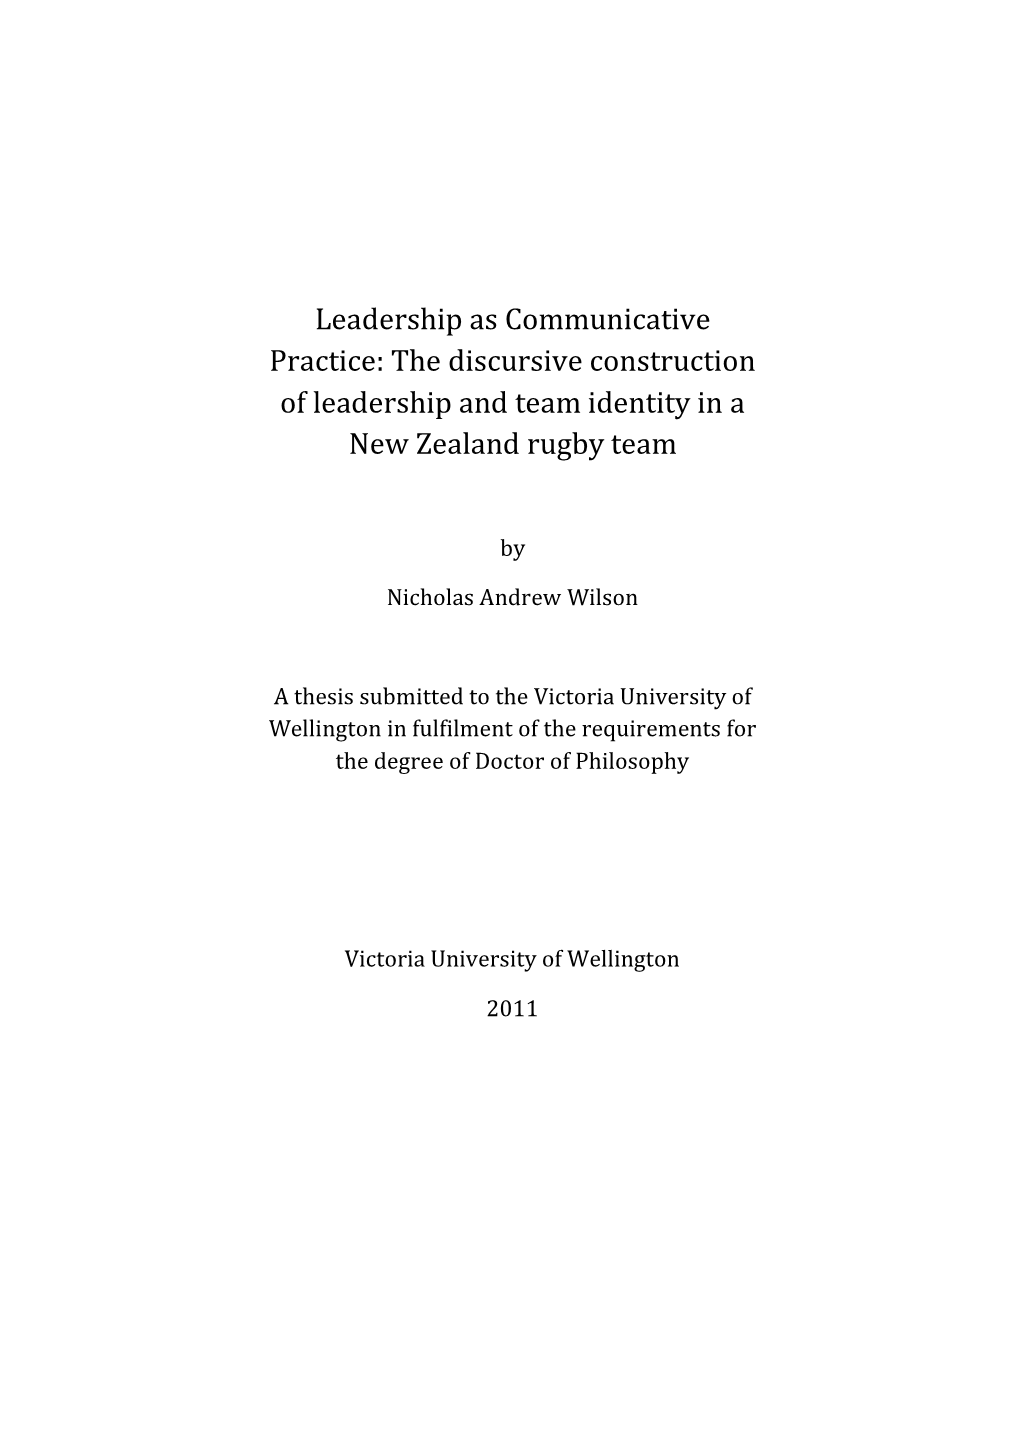 Leadership As Communicative Practice: the Discursive Construction of Leadership and Team Identity in a New Zealand Rugby Team